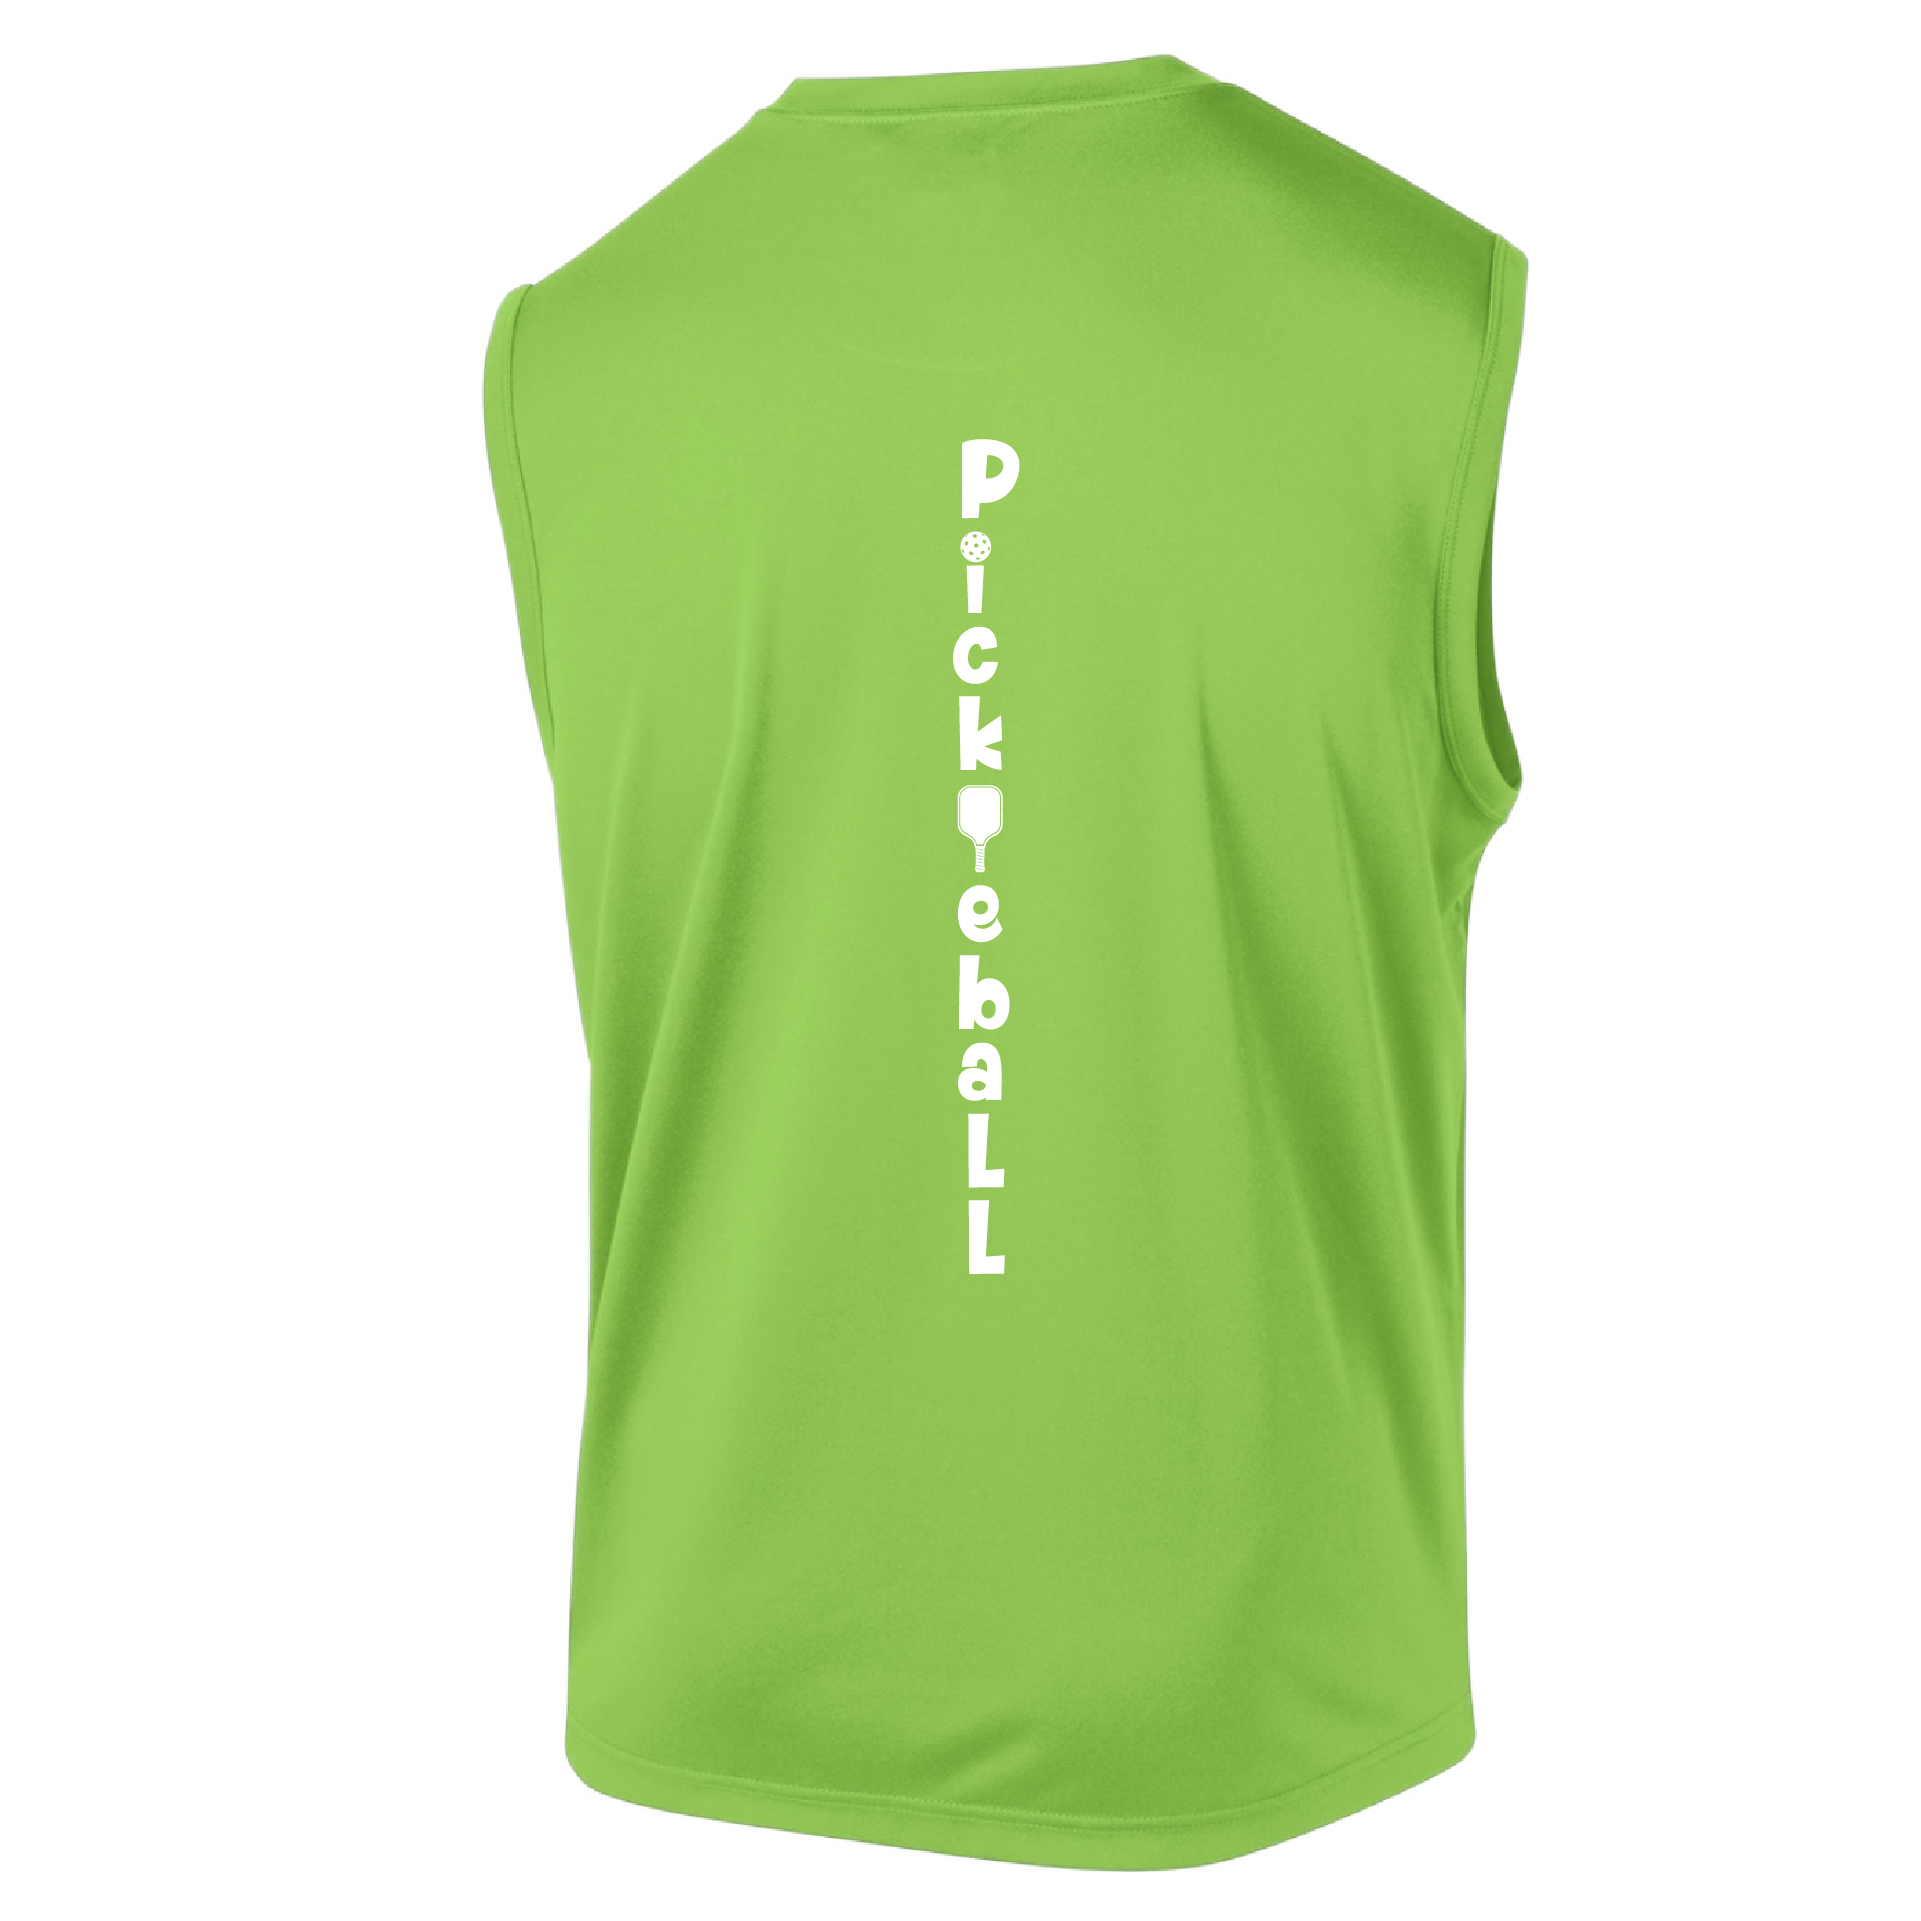 Pickleball Design: Pickleball Vertical Customizable Location  Men's Styles: Sleeveless (SL)  Shirts are lightweight, roomy and highly breathable. These moisture-wicking shirts are designed for athletic performance. They feature PosiCharge technology to lock in color and prevent logos from fading. Removable tag and set-in sleeves for comfort.